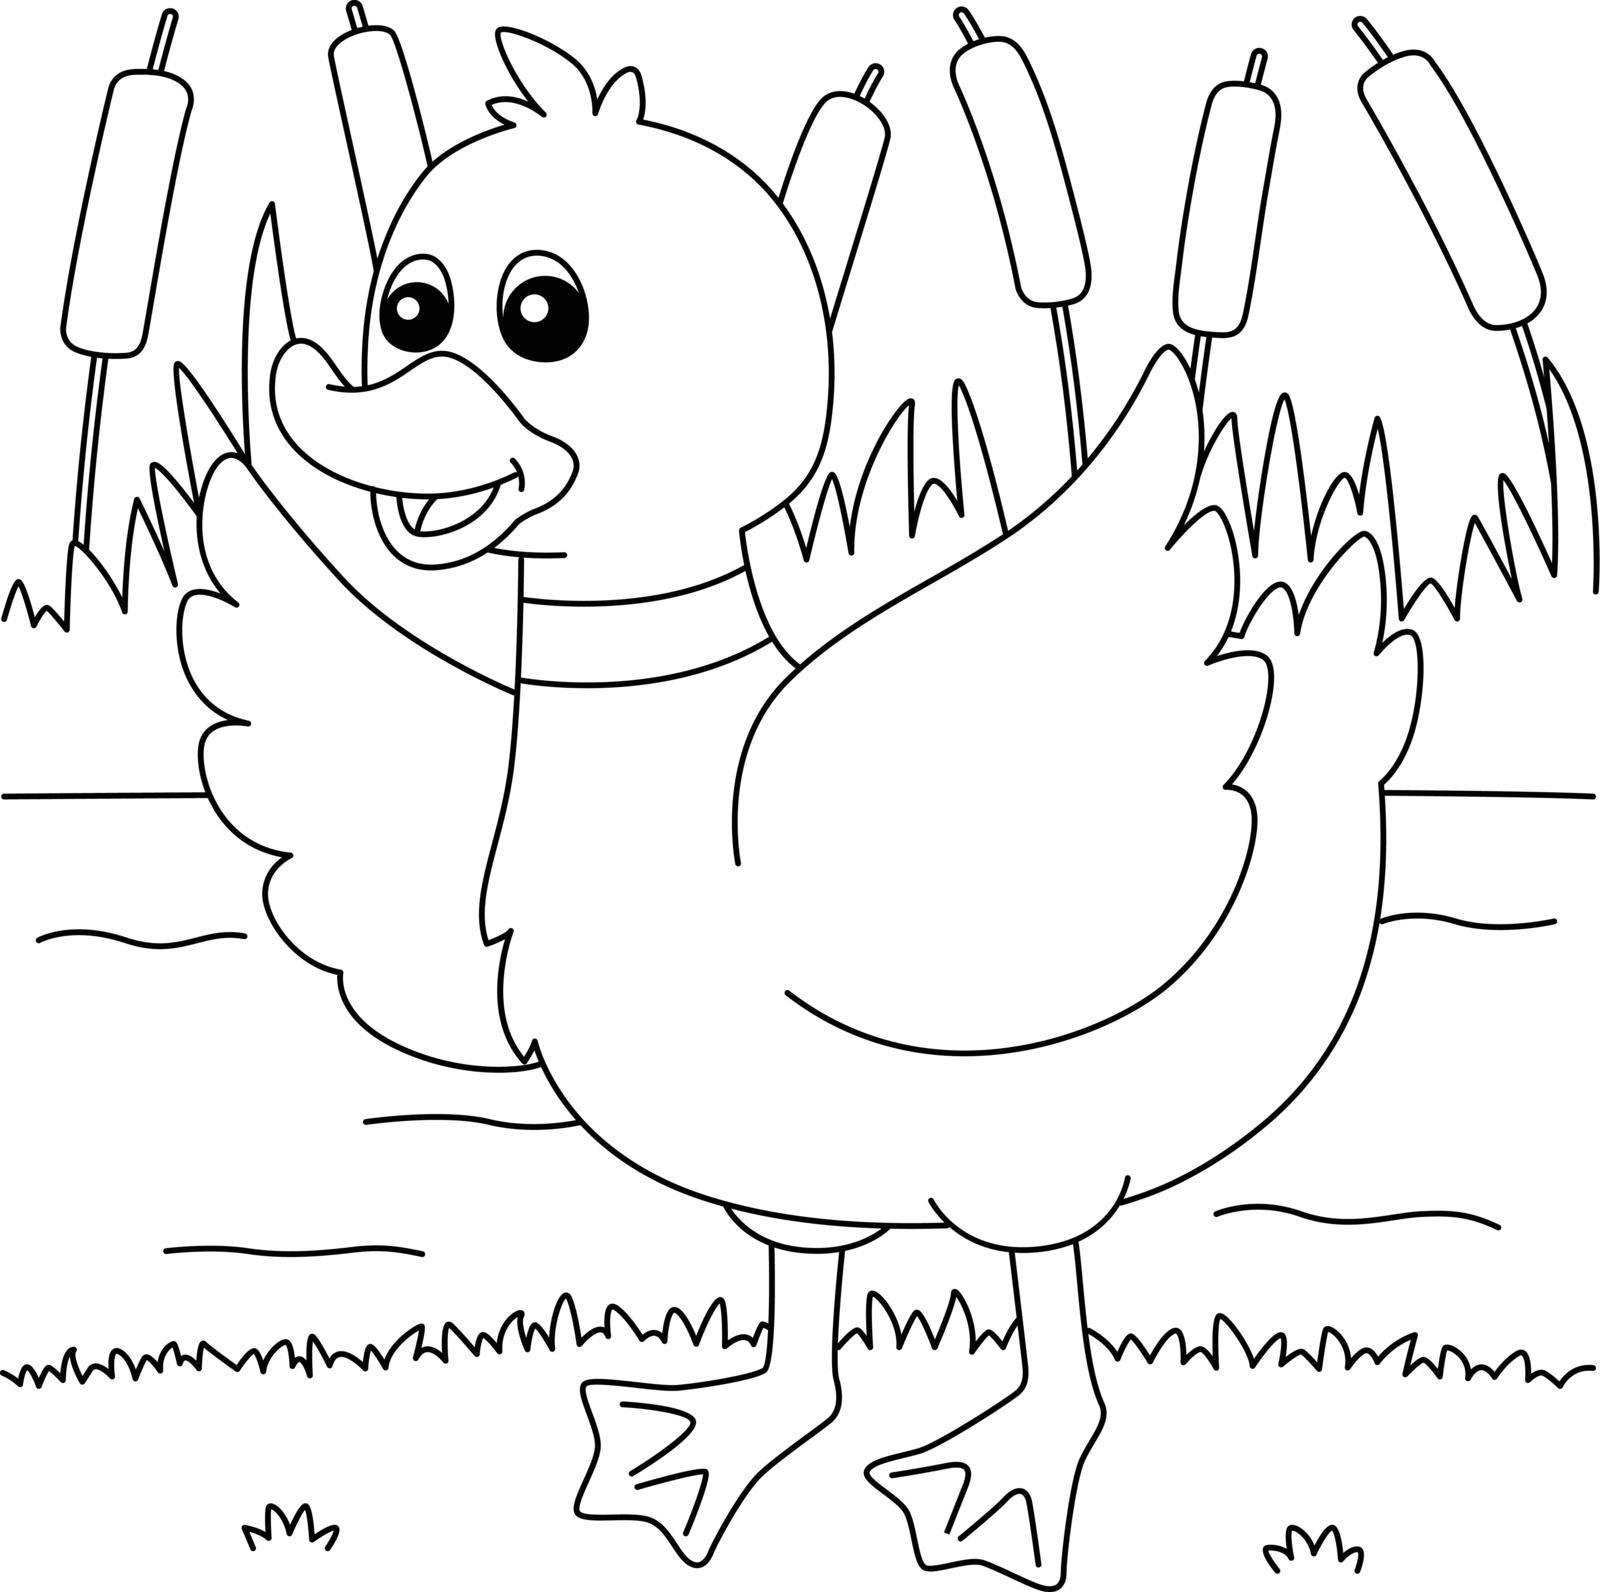 Duck Coloring Page for Kids by abbydesign